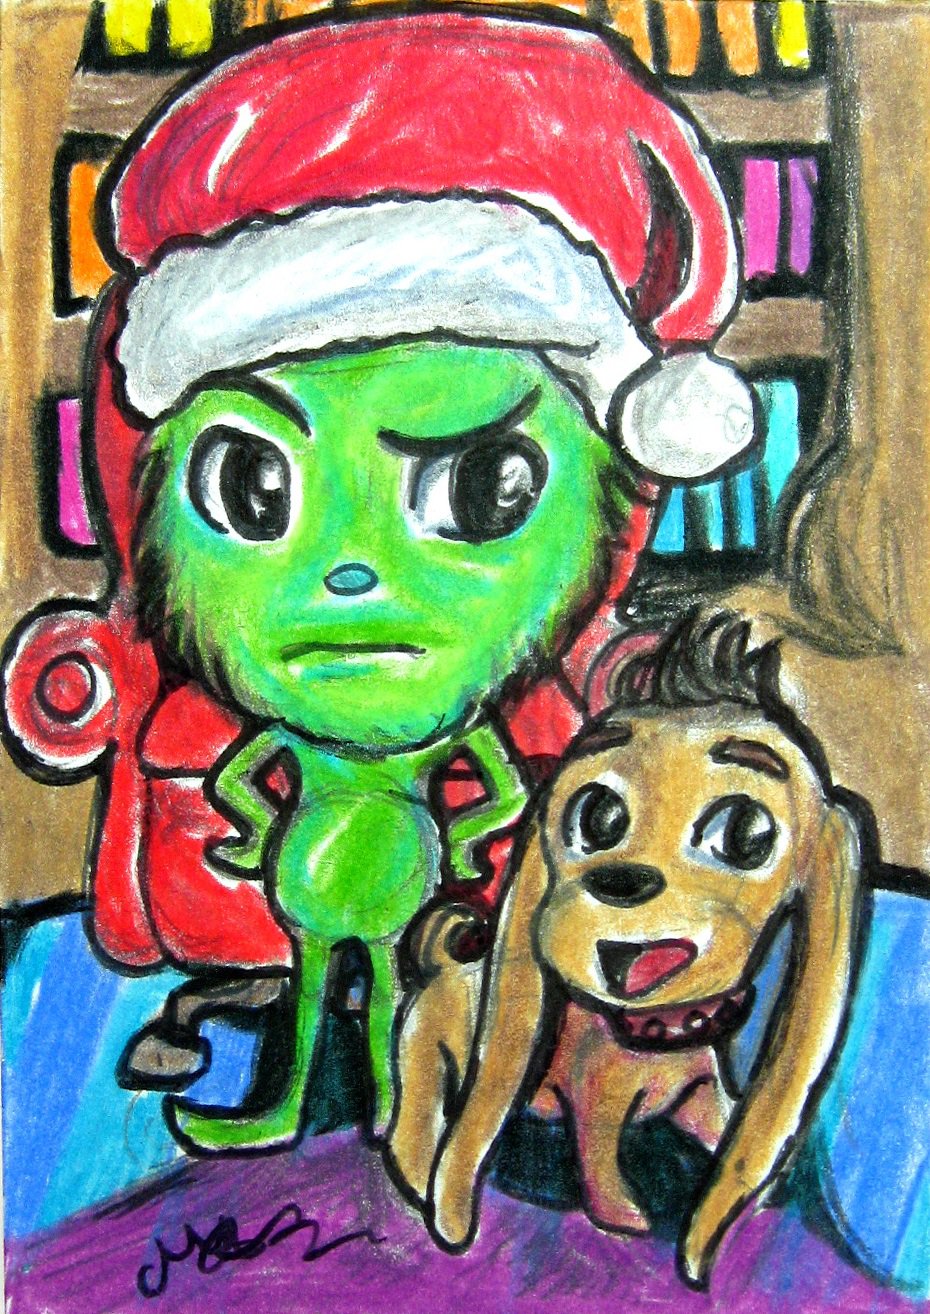 Dr Seuss The Grinch Christmas Holiday Classic Original Art Sketch Card Drawing ACEO PSC 1/1 by Maia